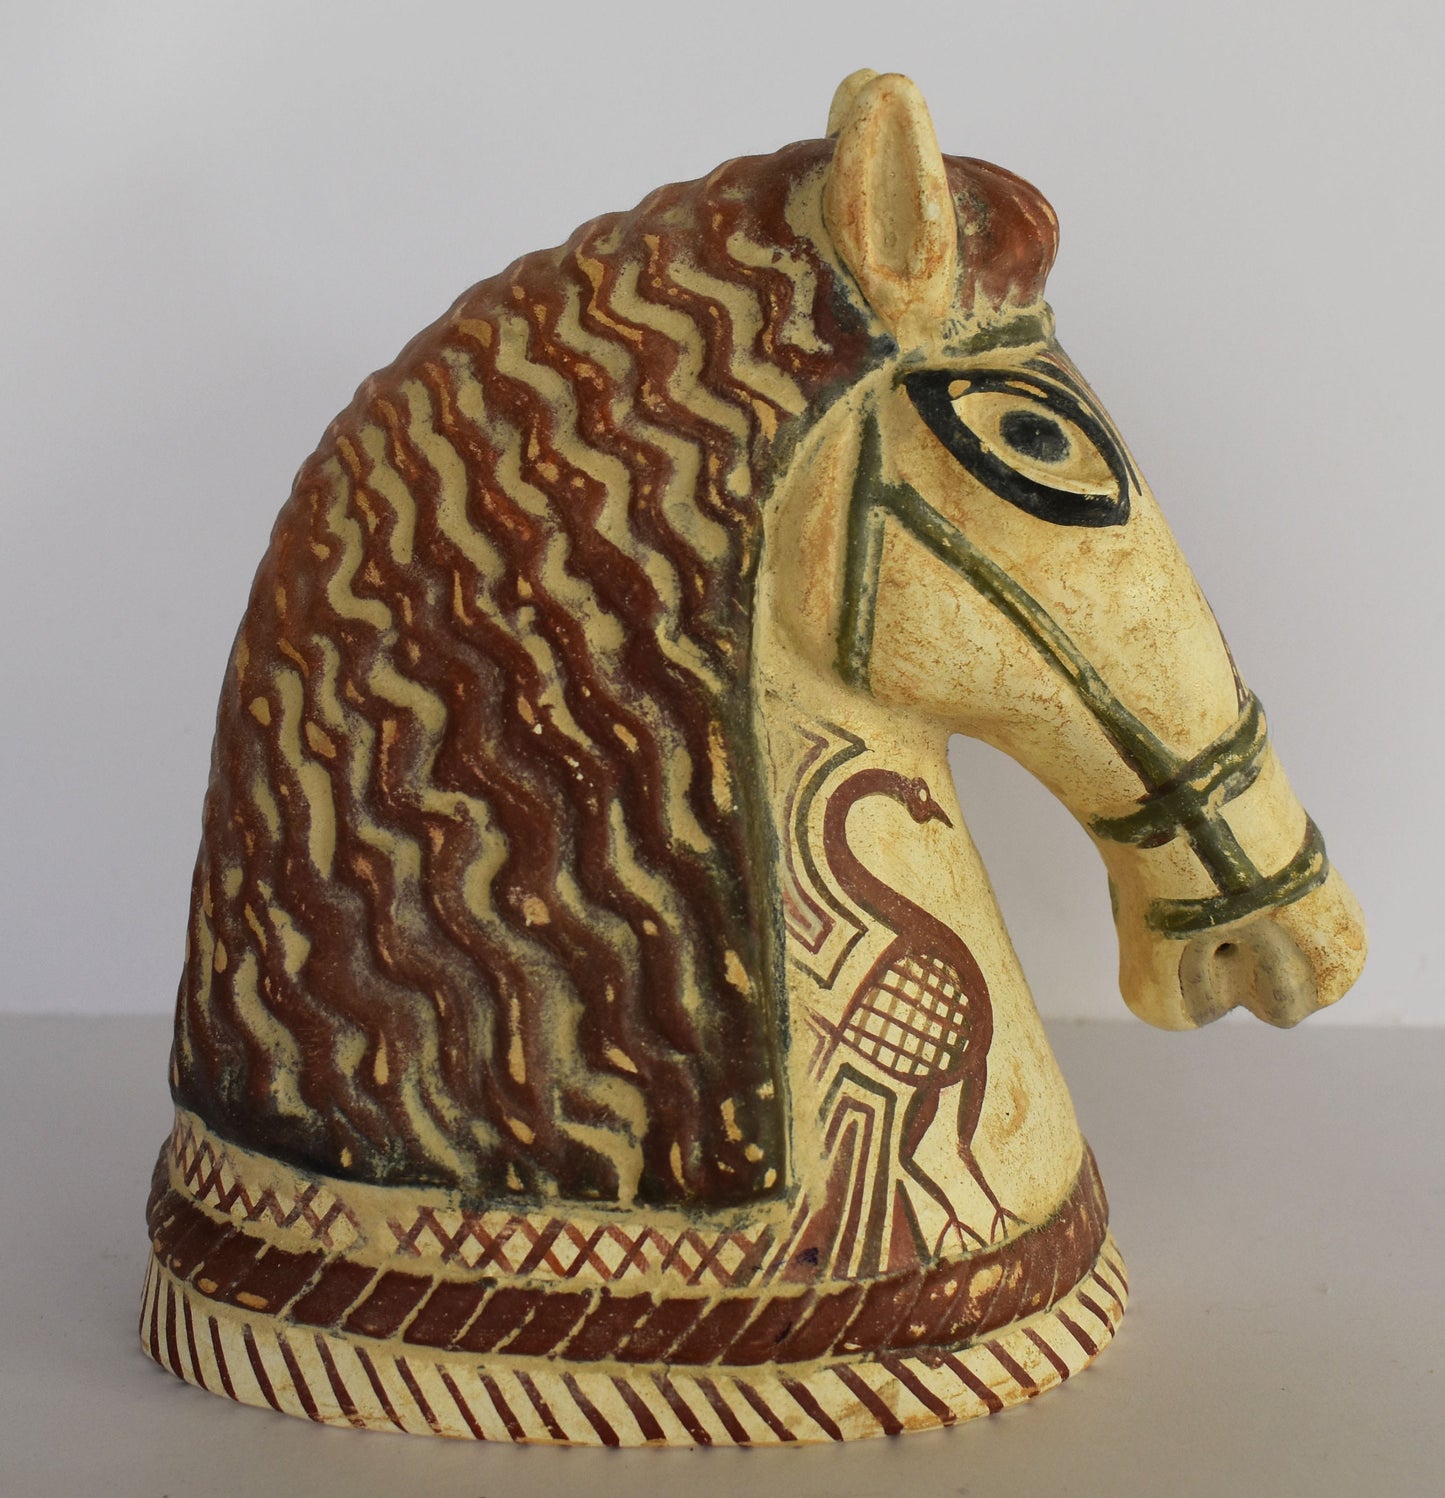 Horse Head - about 500 BC - Symbol of Wealth and Prosperity - Ceramic Artifact